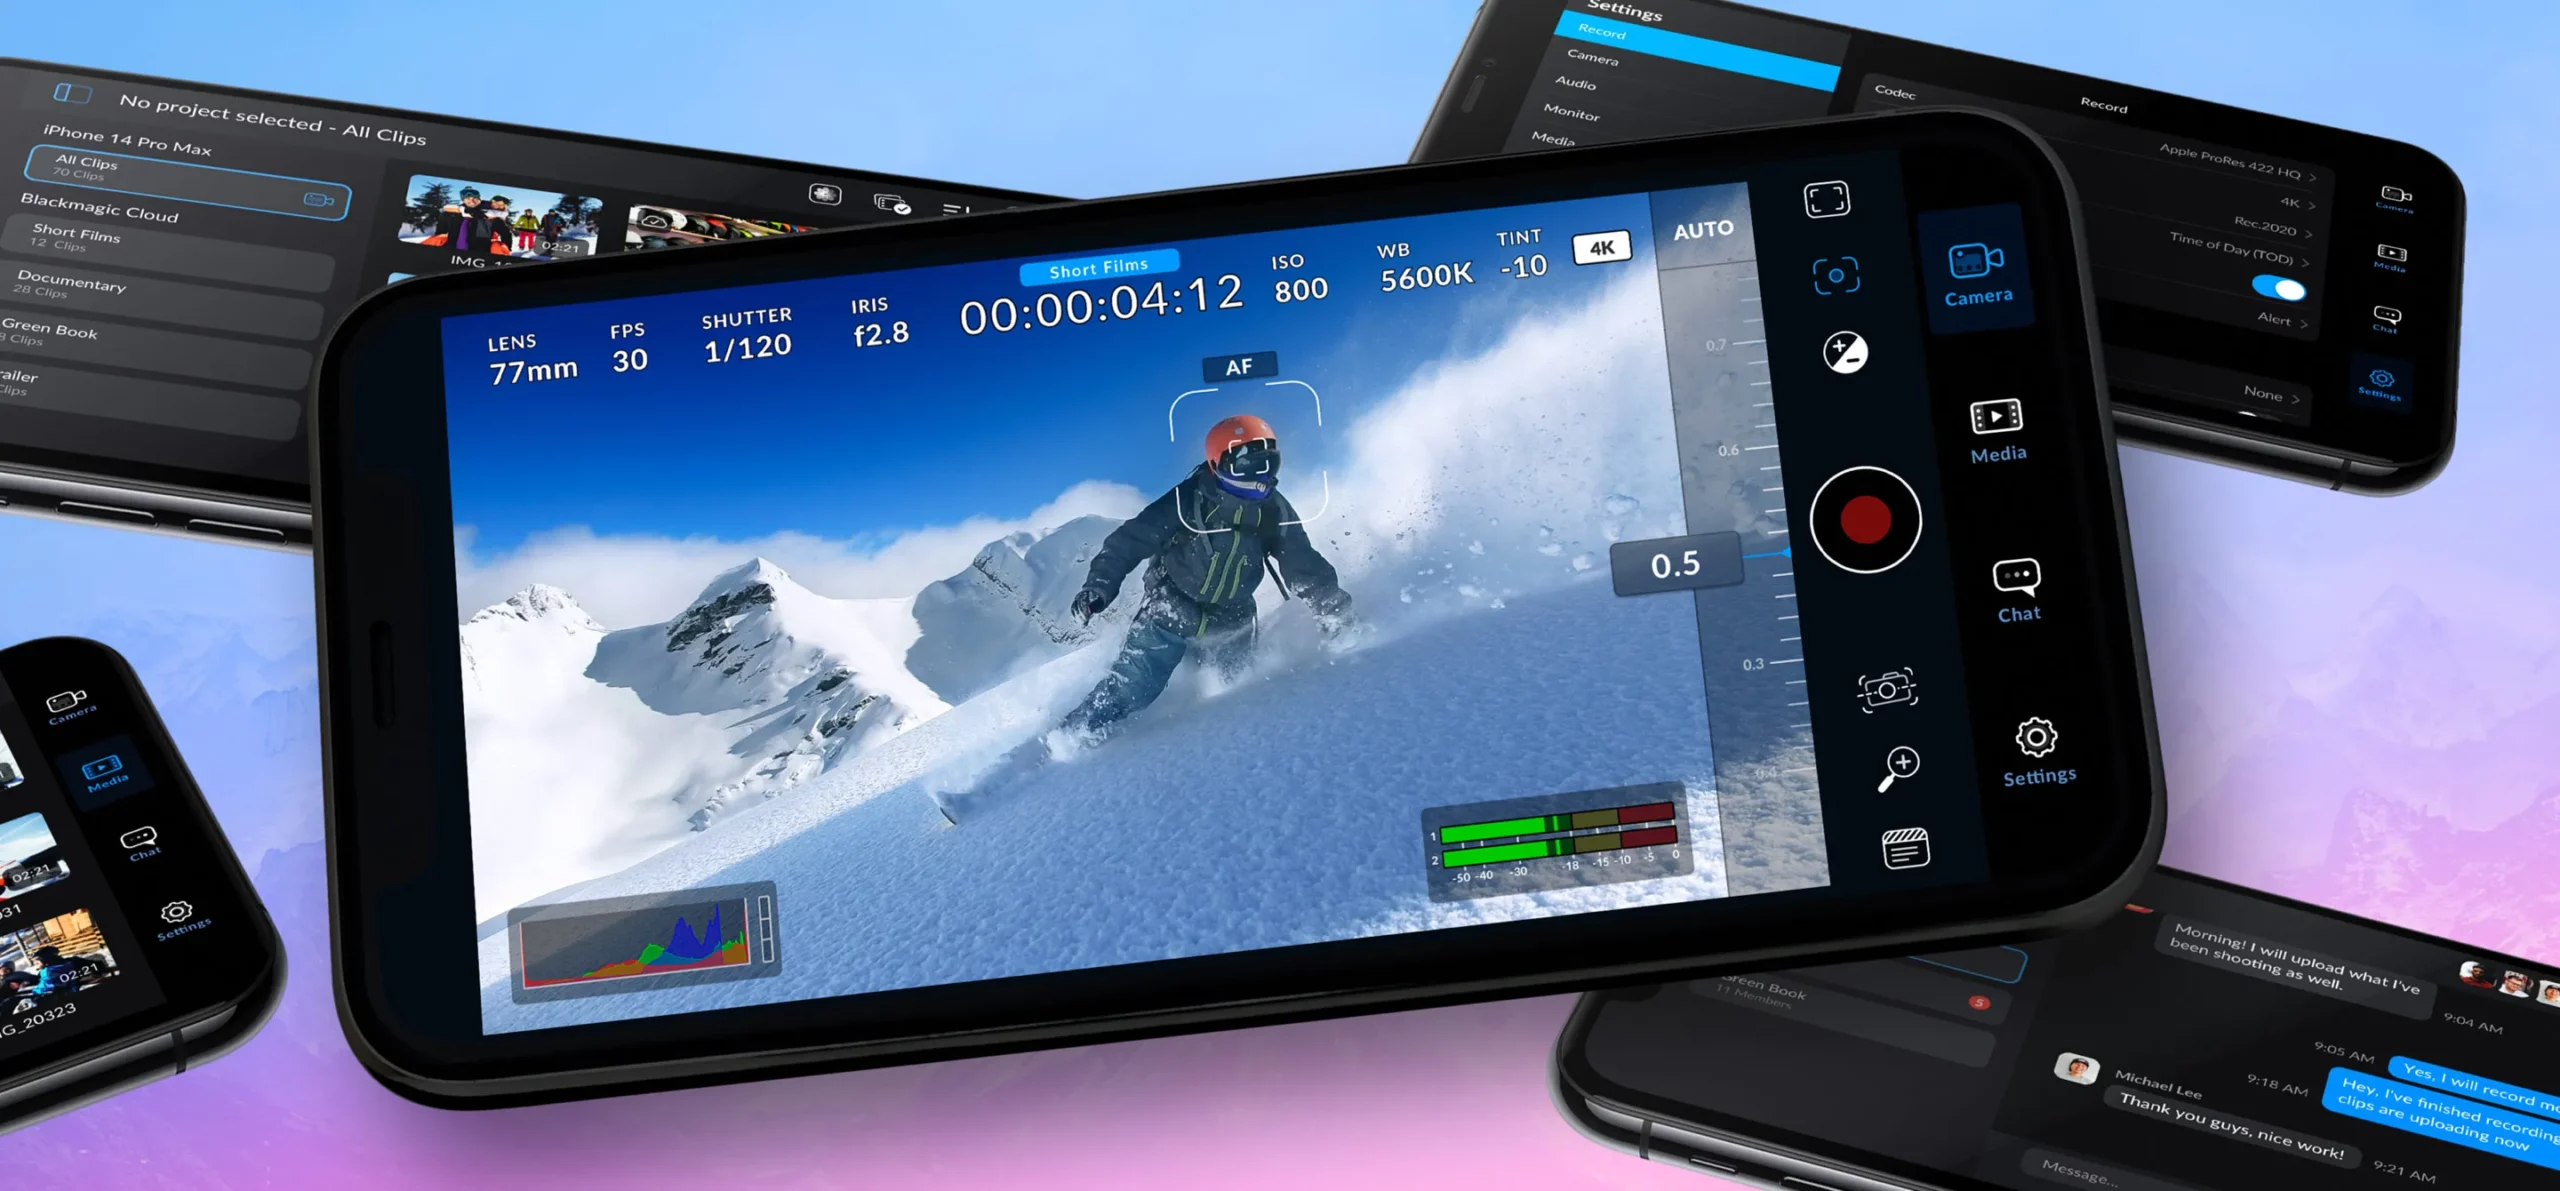 Blackmagic’s Revolutionary App: Elevating iPhone Videography to Pro Levels Freely